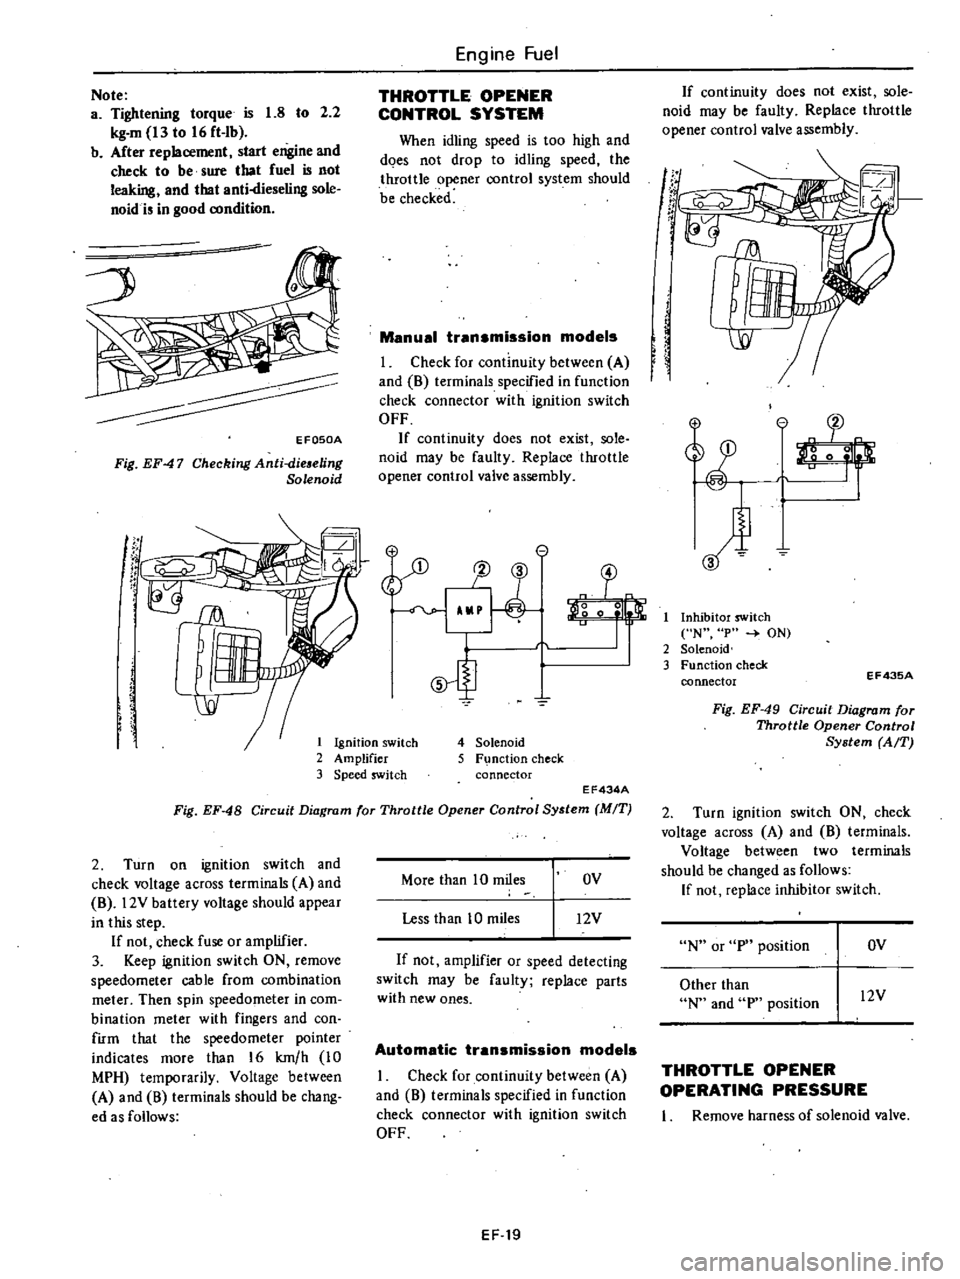 DATSUN 210 1979  Service Manual 
1

Ignition 
switch

2

Amplifier

3

Speed 
switch
Note

a

Tightening 
torque 
is 
1 
8

to 
2 
2

kg 
m 
13 
to 
16 
ft 
Ib

b 
After

replacement 
start

engine 
and

check 
to 
be 
sure 
that 
f